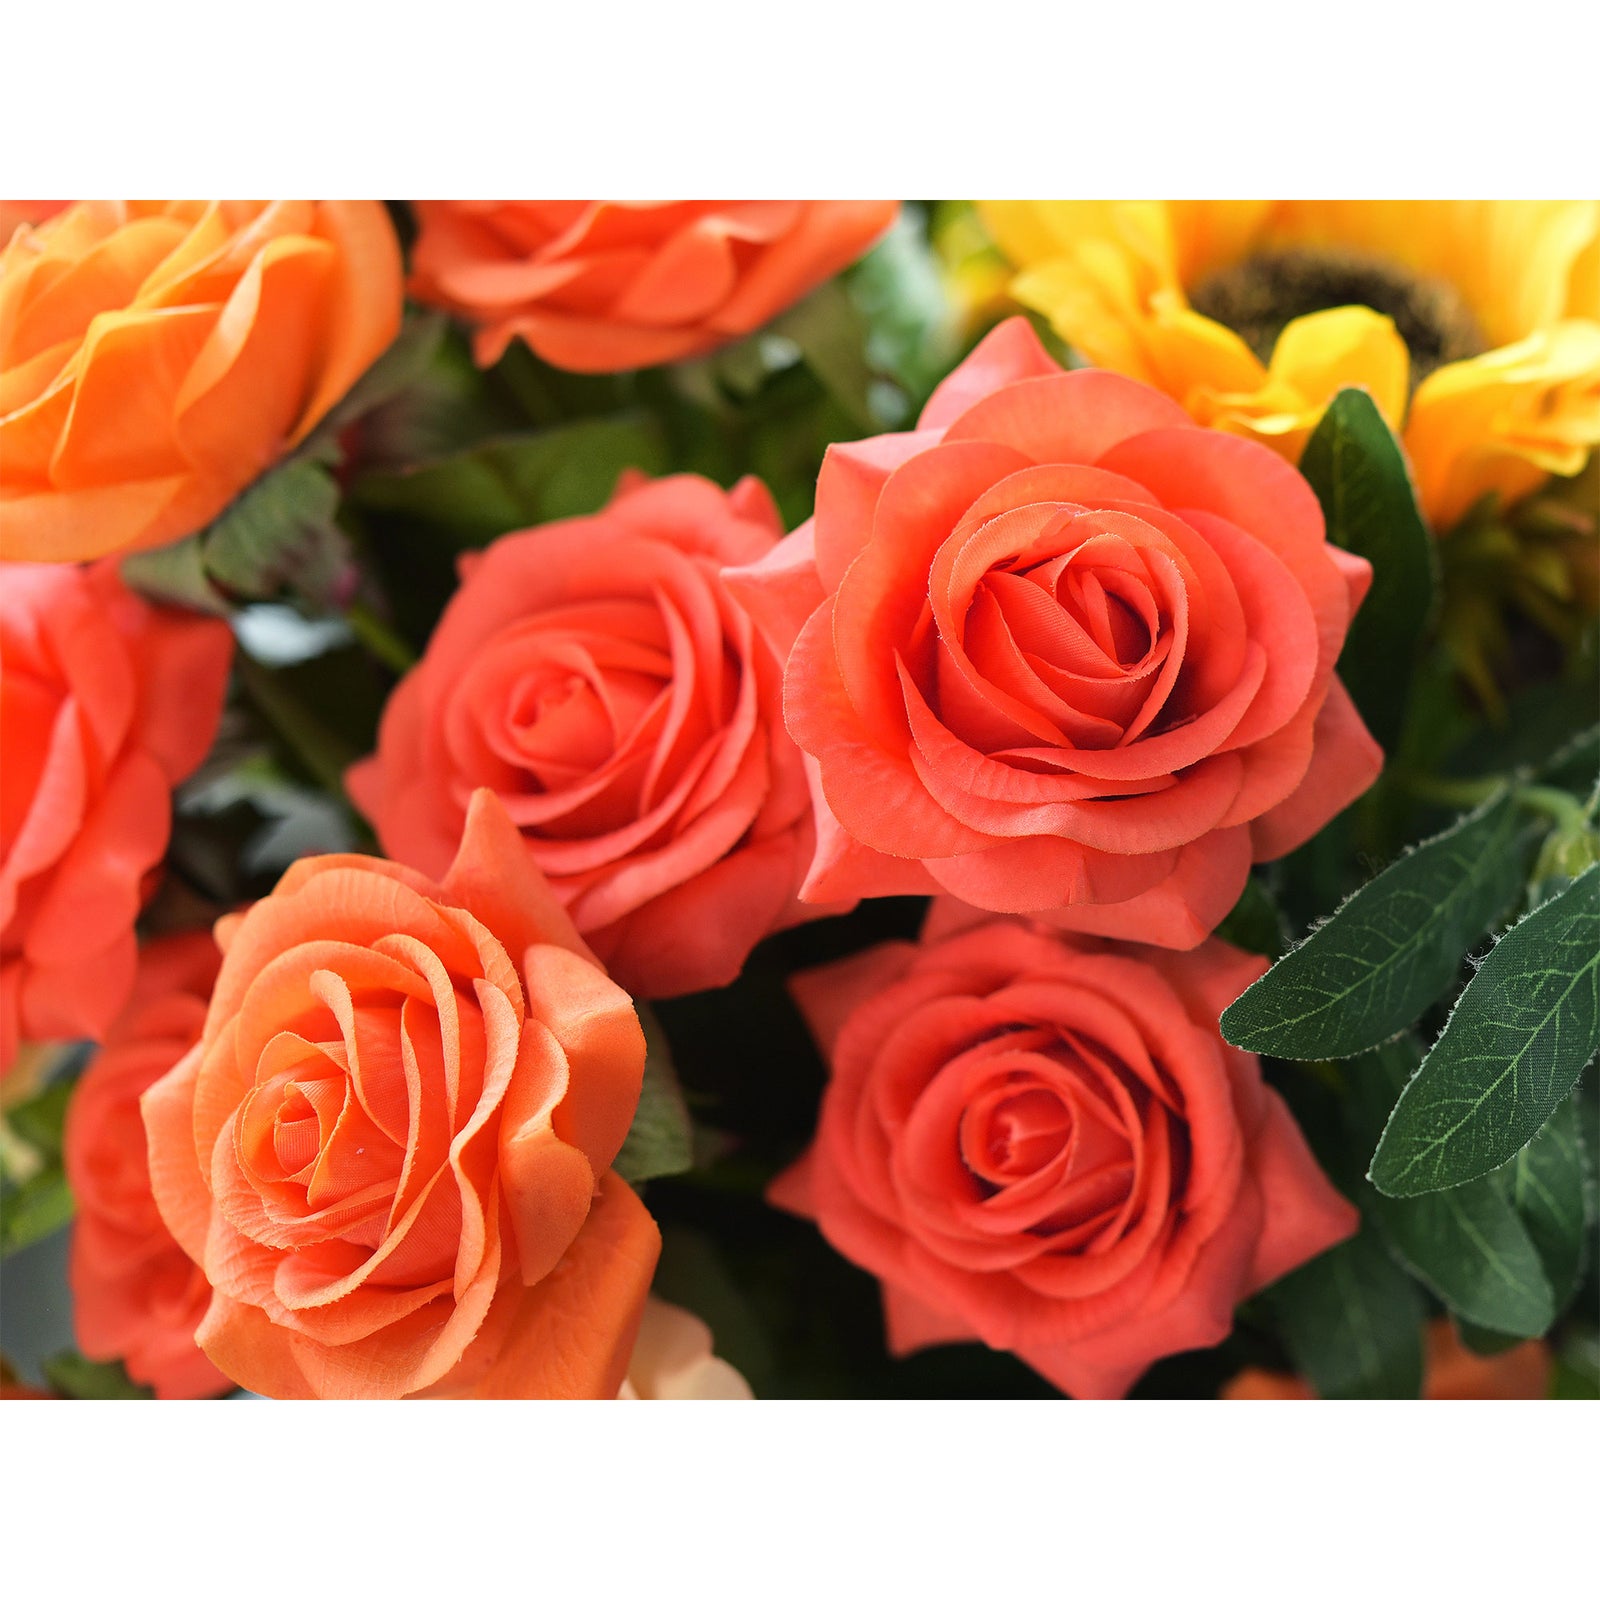 Tangerine Orange Real Touch Roses Silk Artificial Flowers ‘Petals Feel and Look like Fresh Roses' (10 Stems)